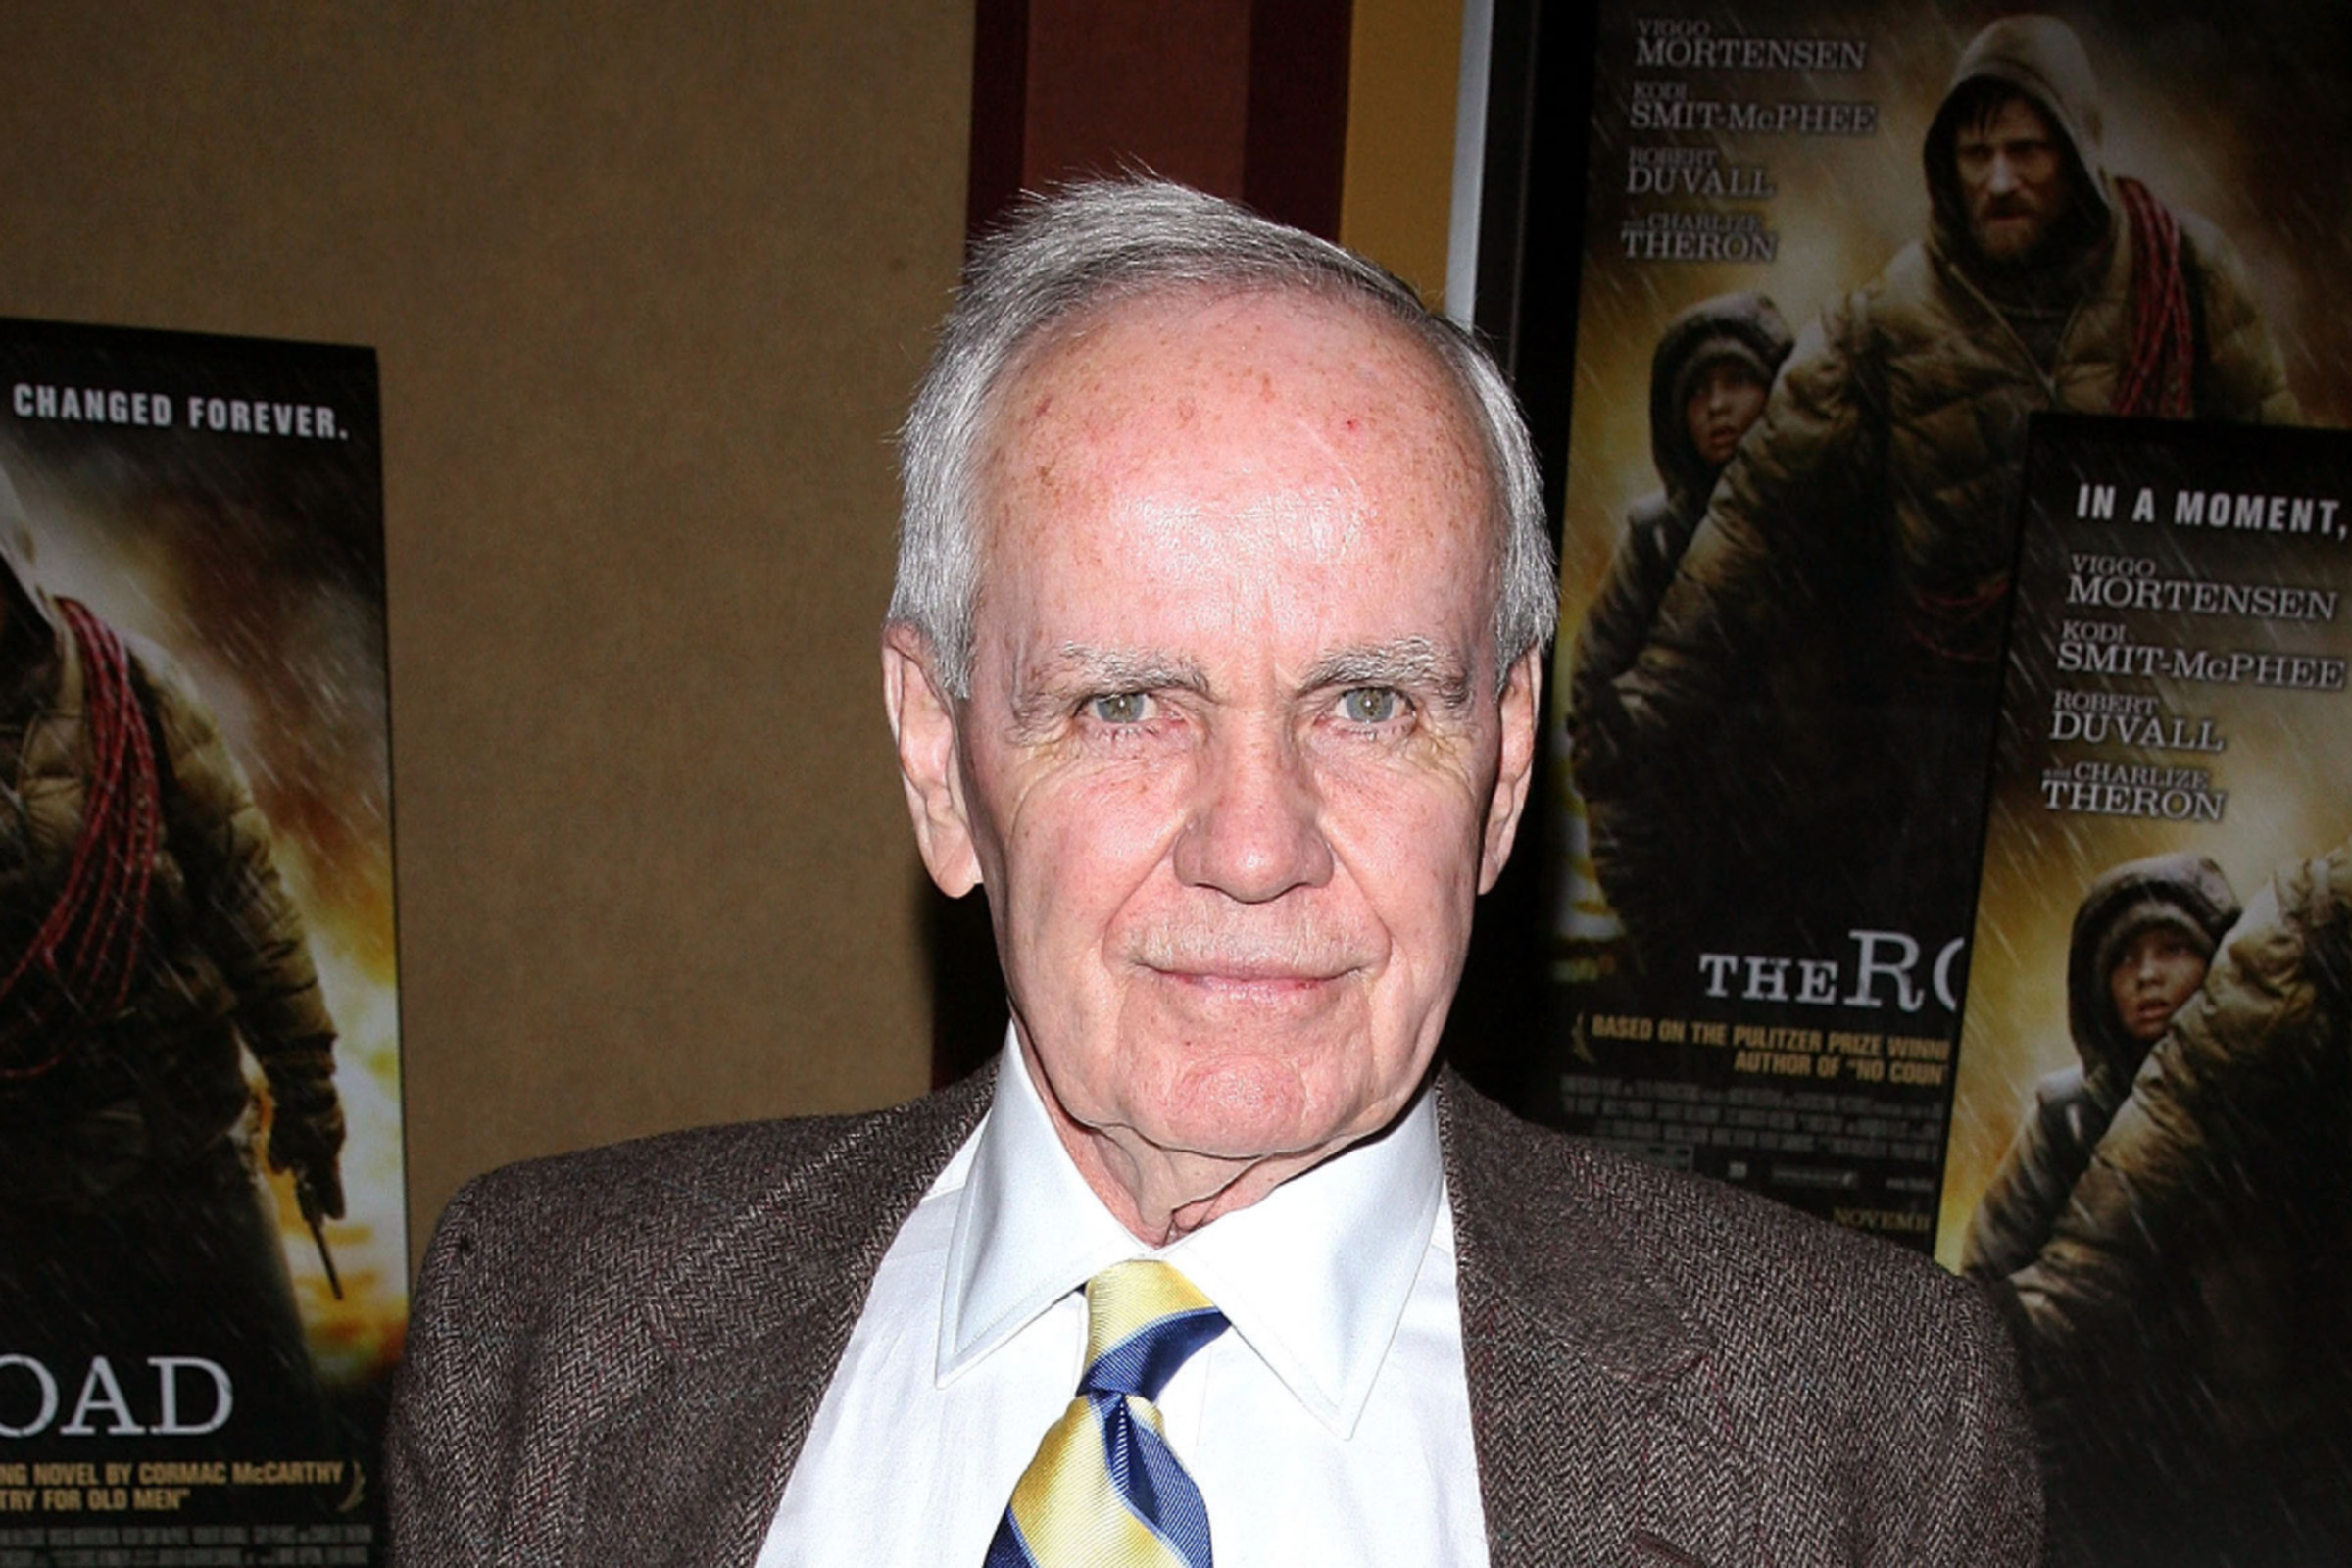 Cormac McCarthy at the premiere of the film adaptation of his novel The Road in 2009. 